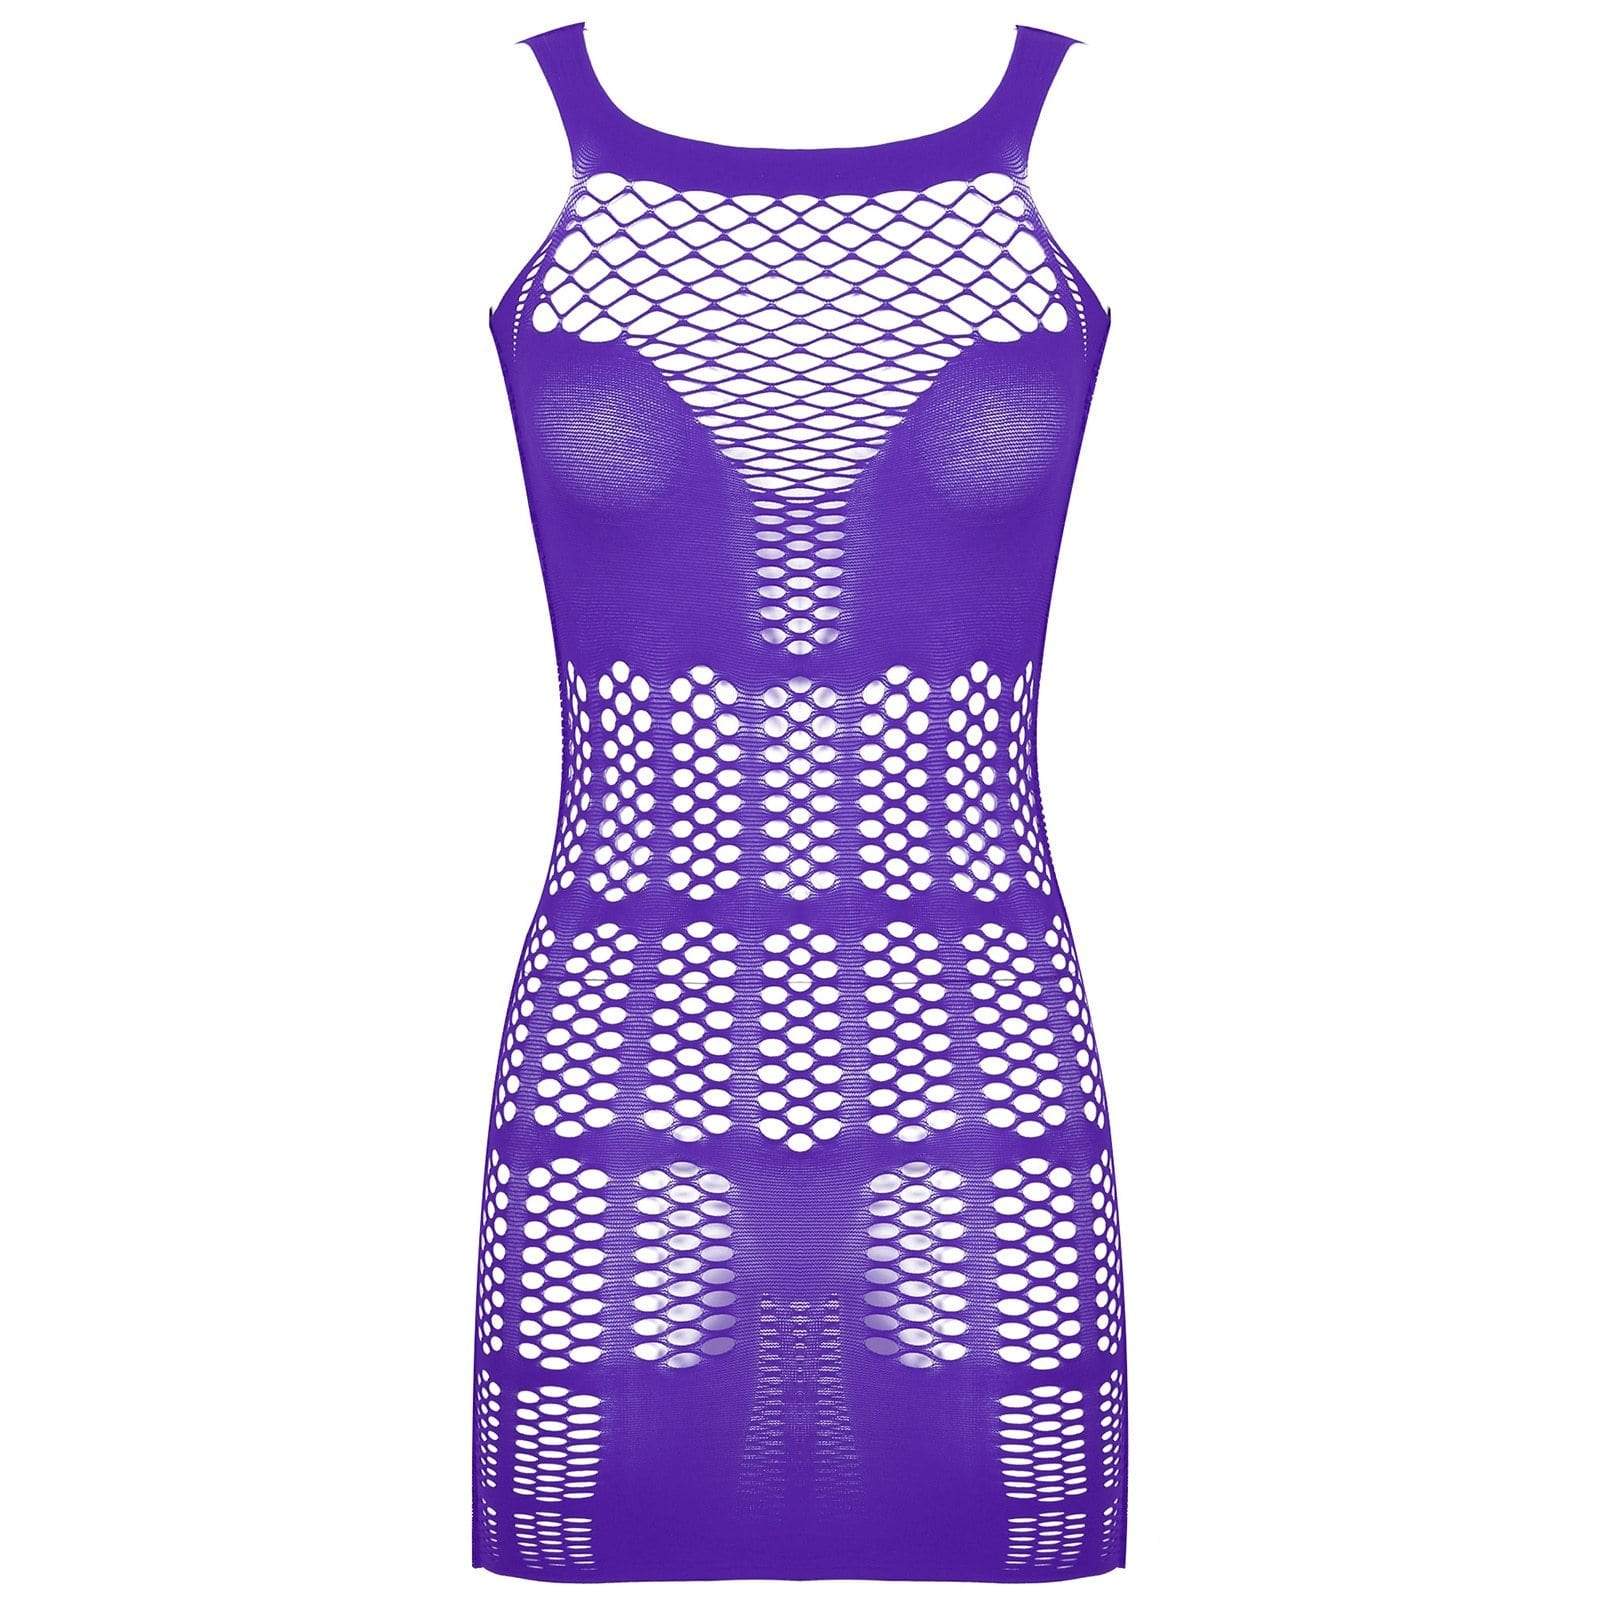 Kinky Cloth 200001895 Lavender / One Size Hollow Out Fishnet Mini Dress